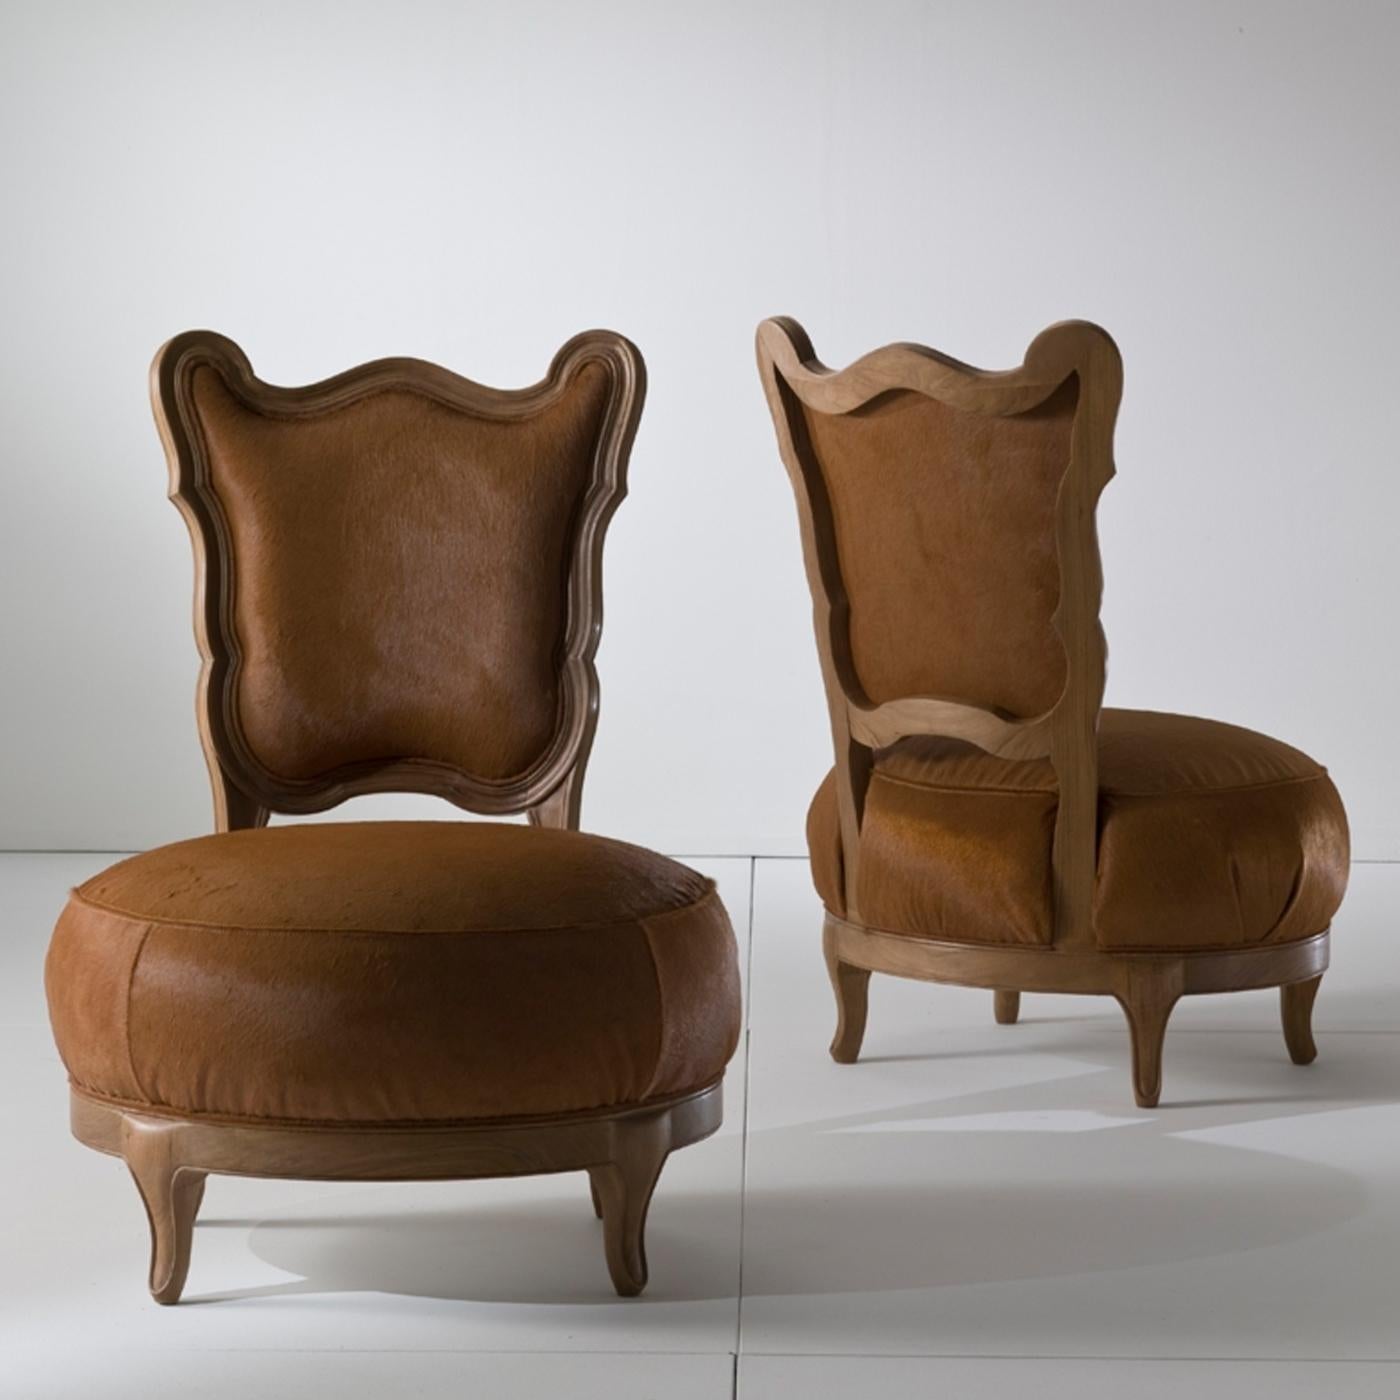 Elegant and fun, the Gattona chair by Nigel Coates is designed for the lounge area. The round shape of the seat, amplified by the upholstery and by the soft horse fur covering, is clearly inspired by that of a cat with its soft hair and chubby